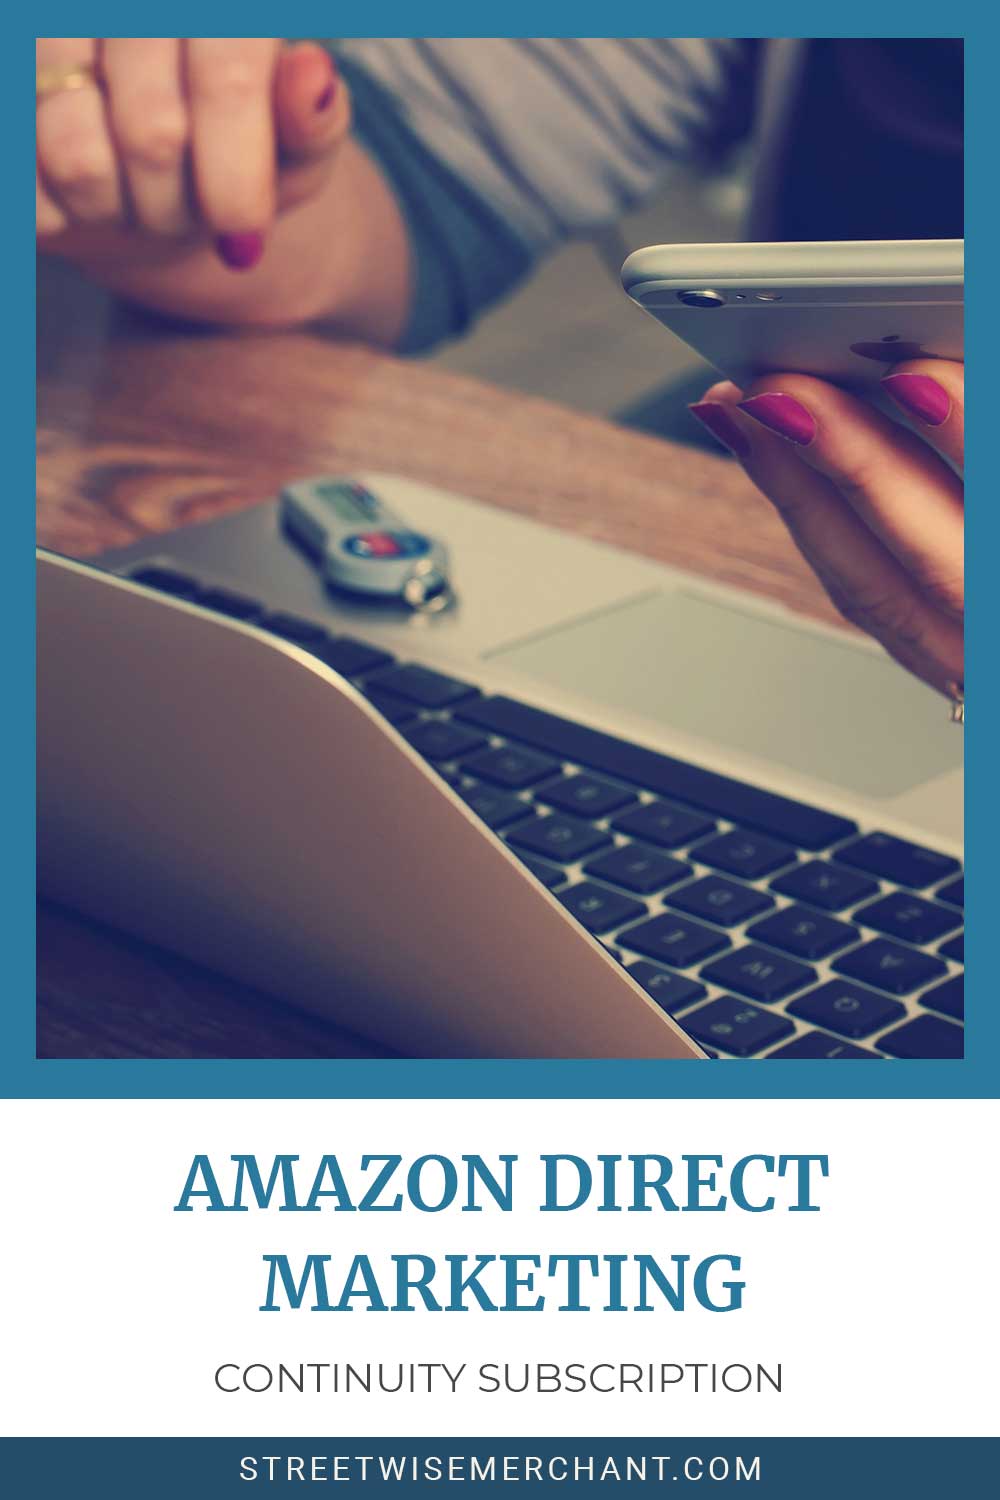 iPhone in a woman's hand and a laptop in front - Amazon Direct Marketing Continuity Subscription.